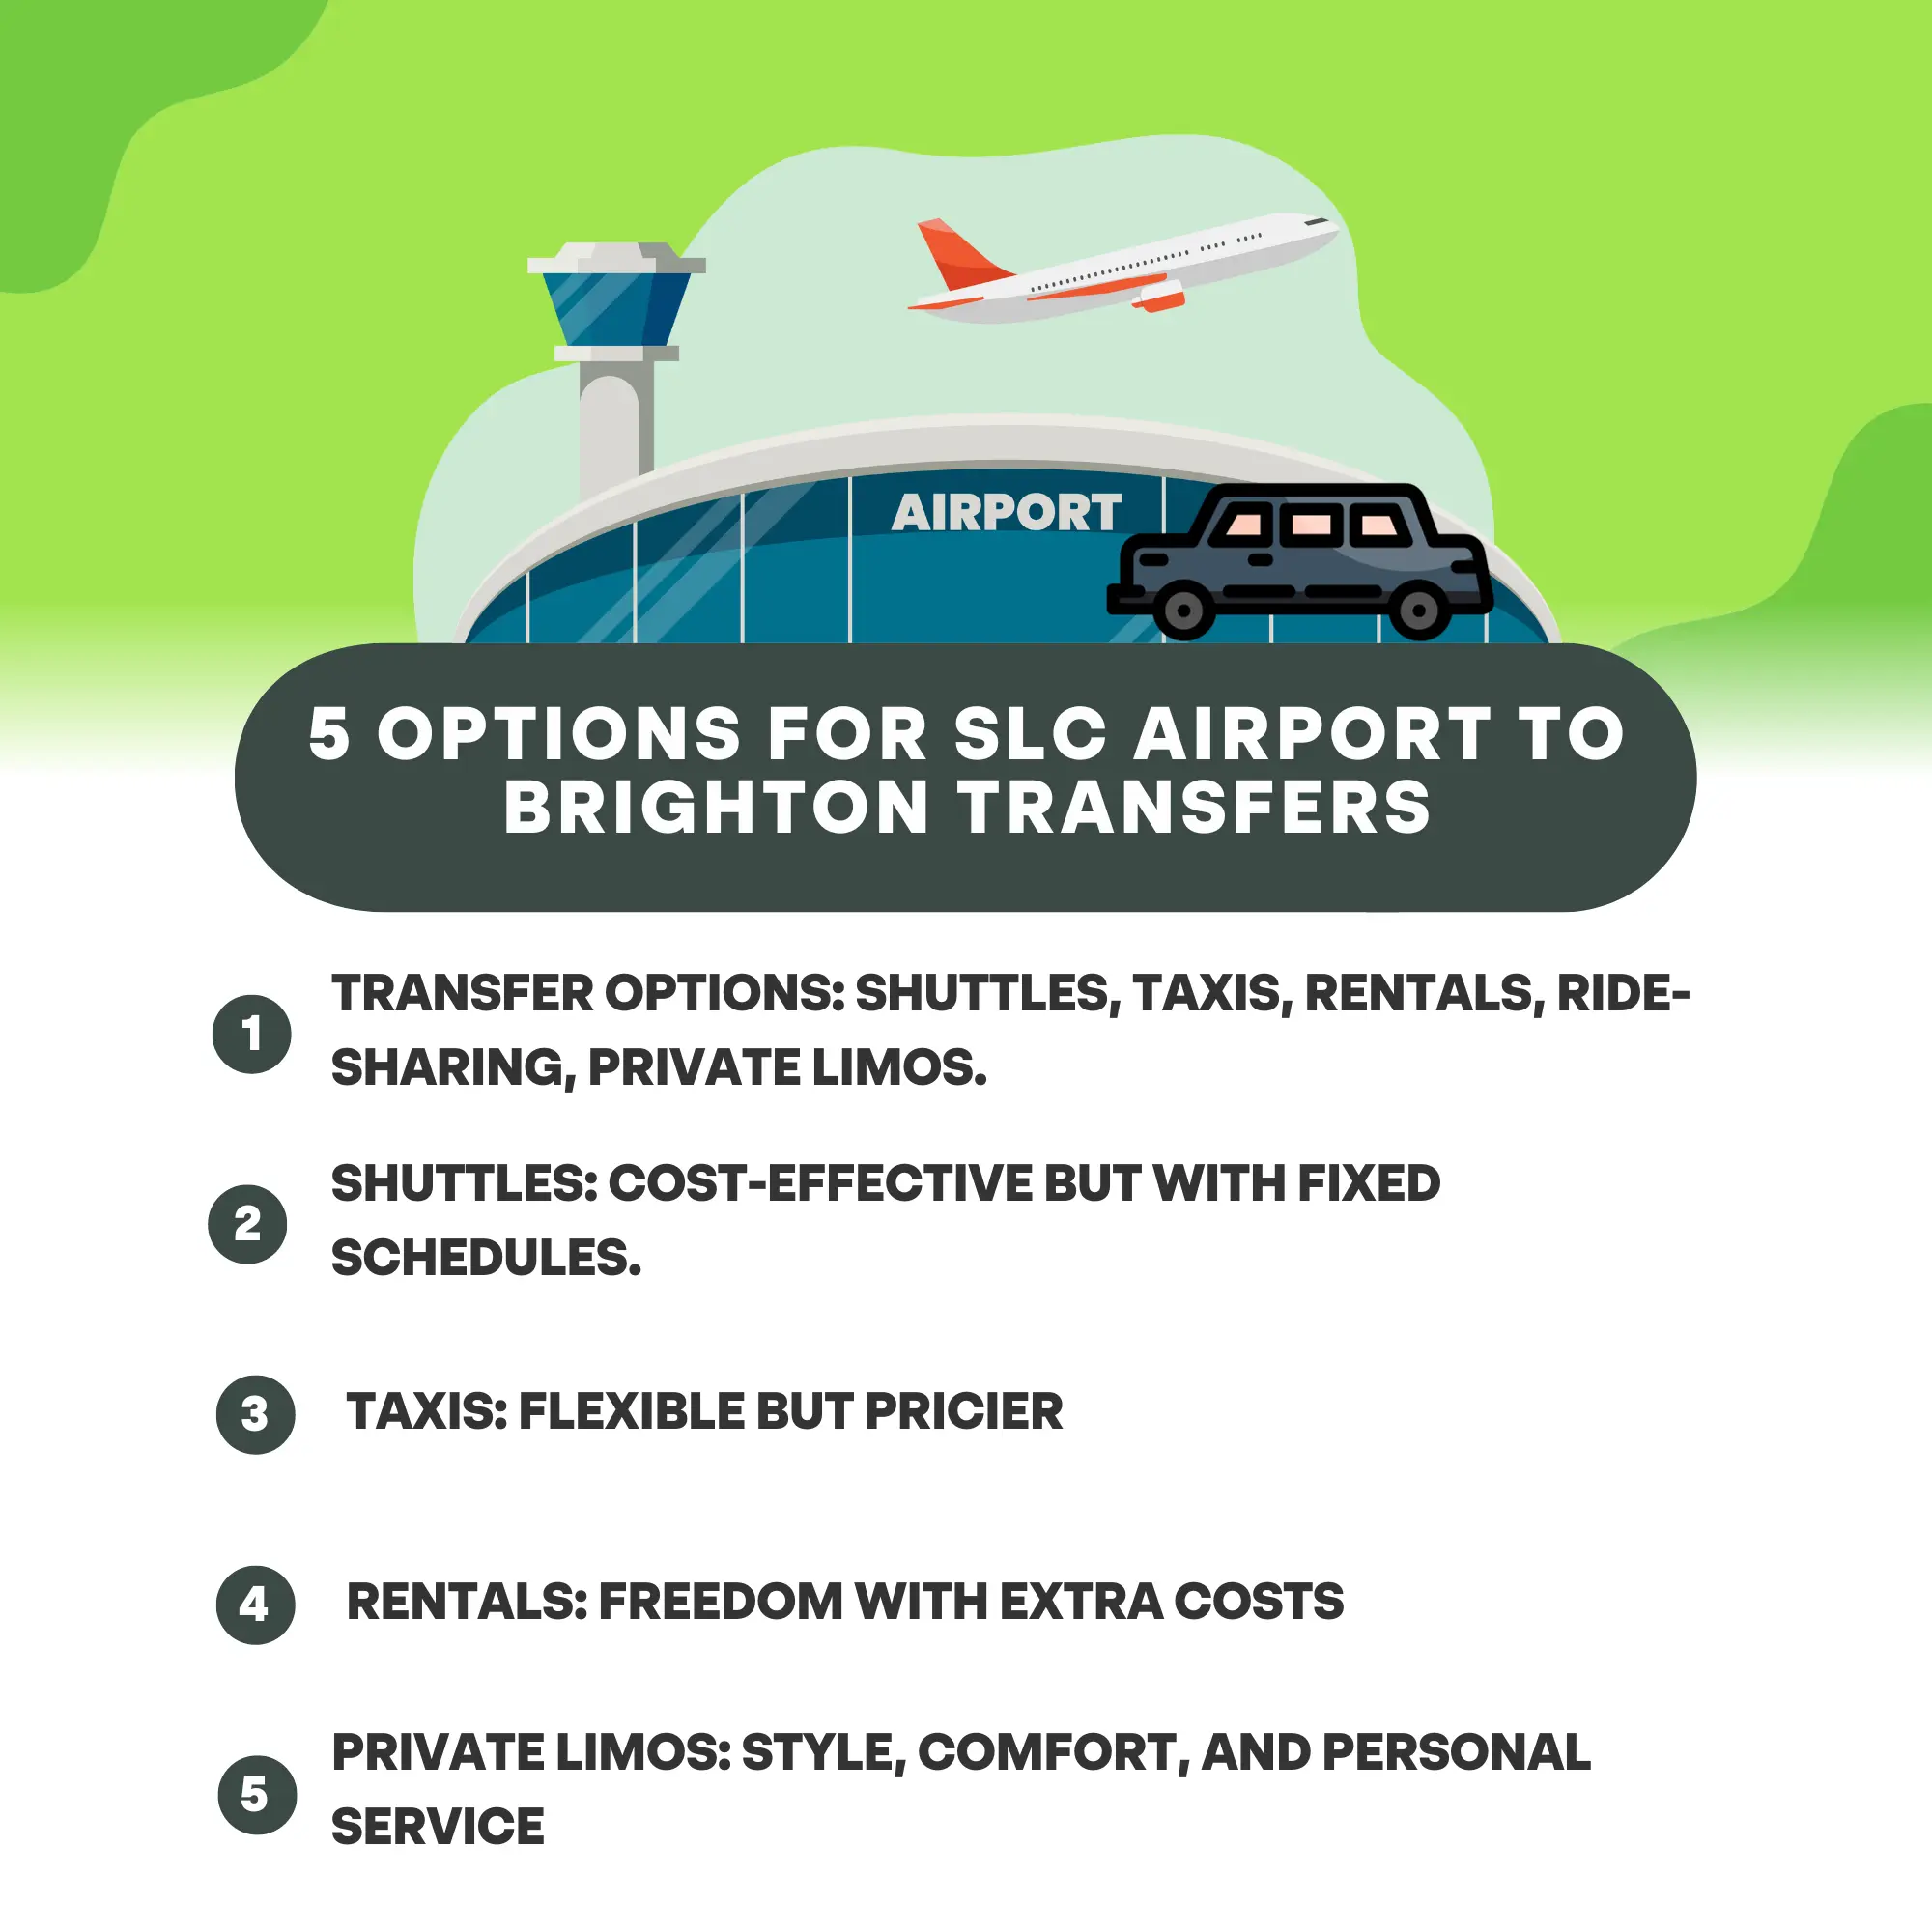 5 Options for SLC Airport to Brighton Transfers